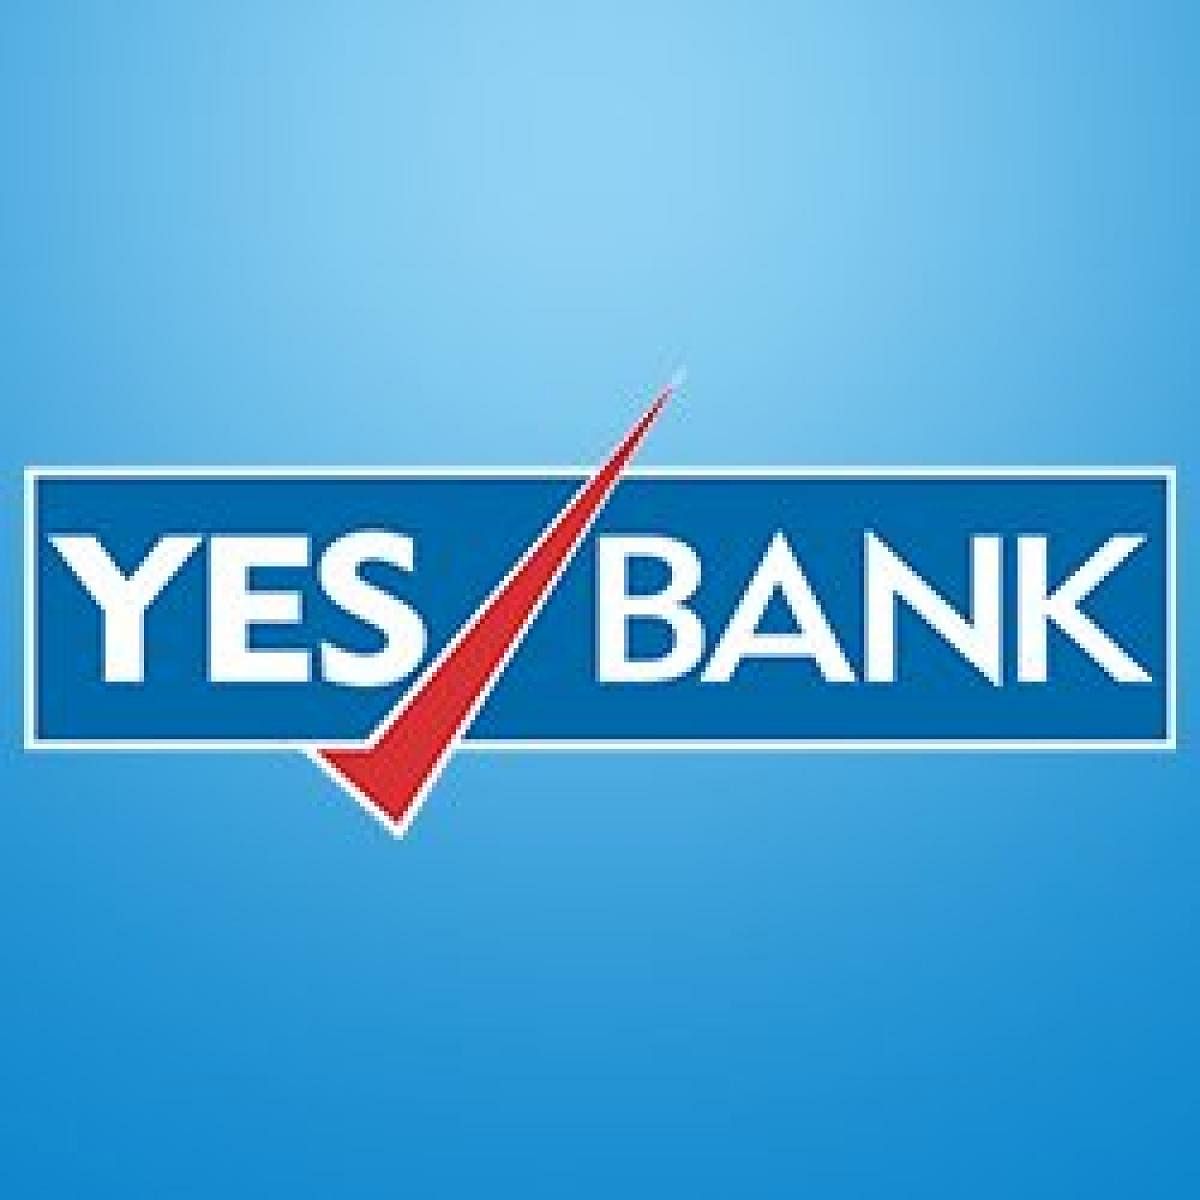 YES Bank. (Photo by Twitter).